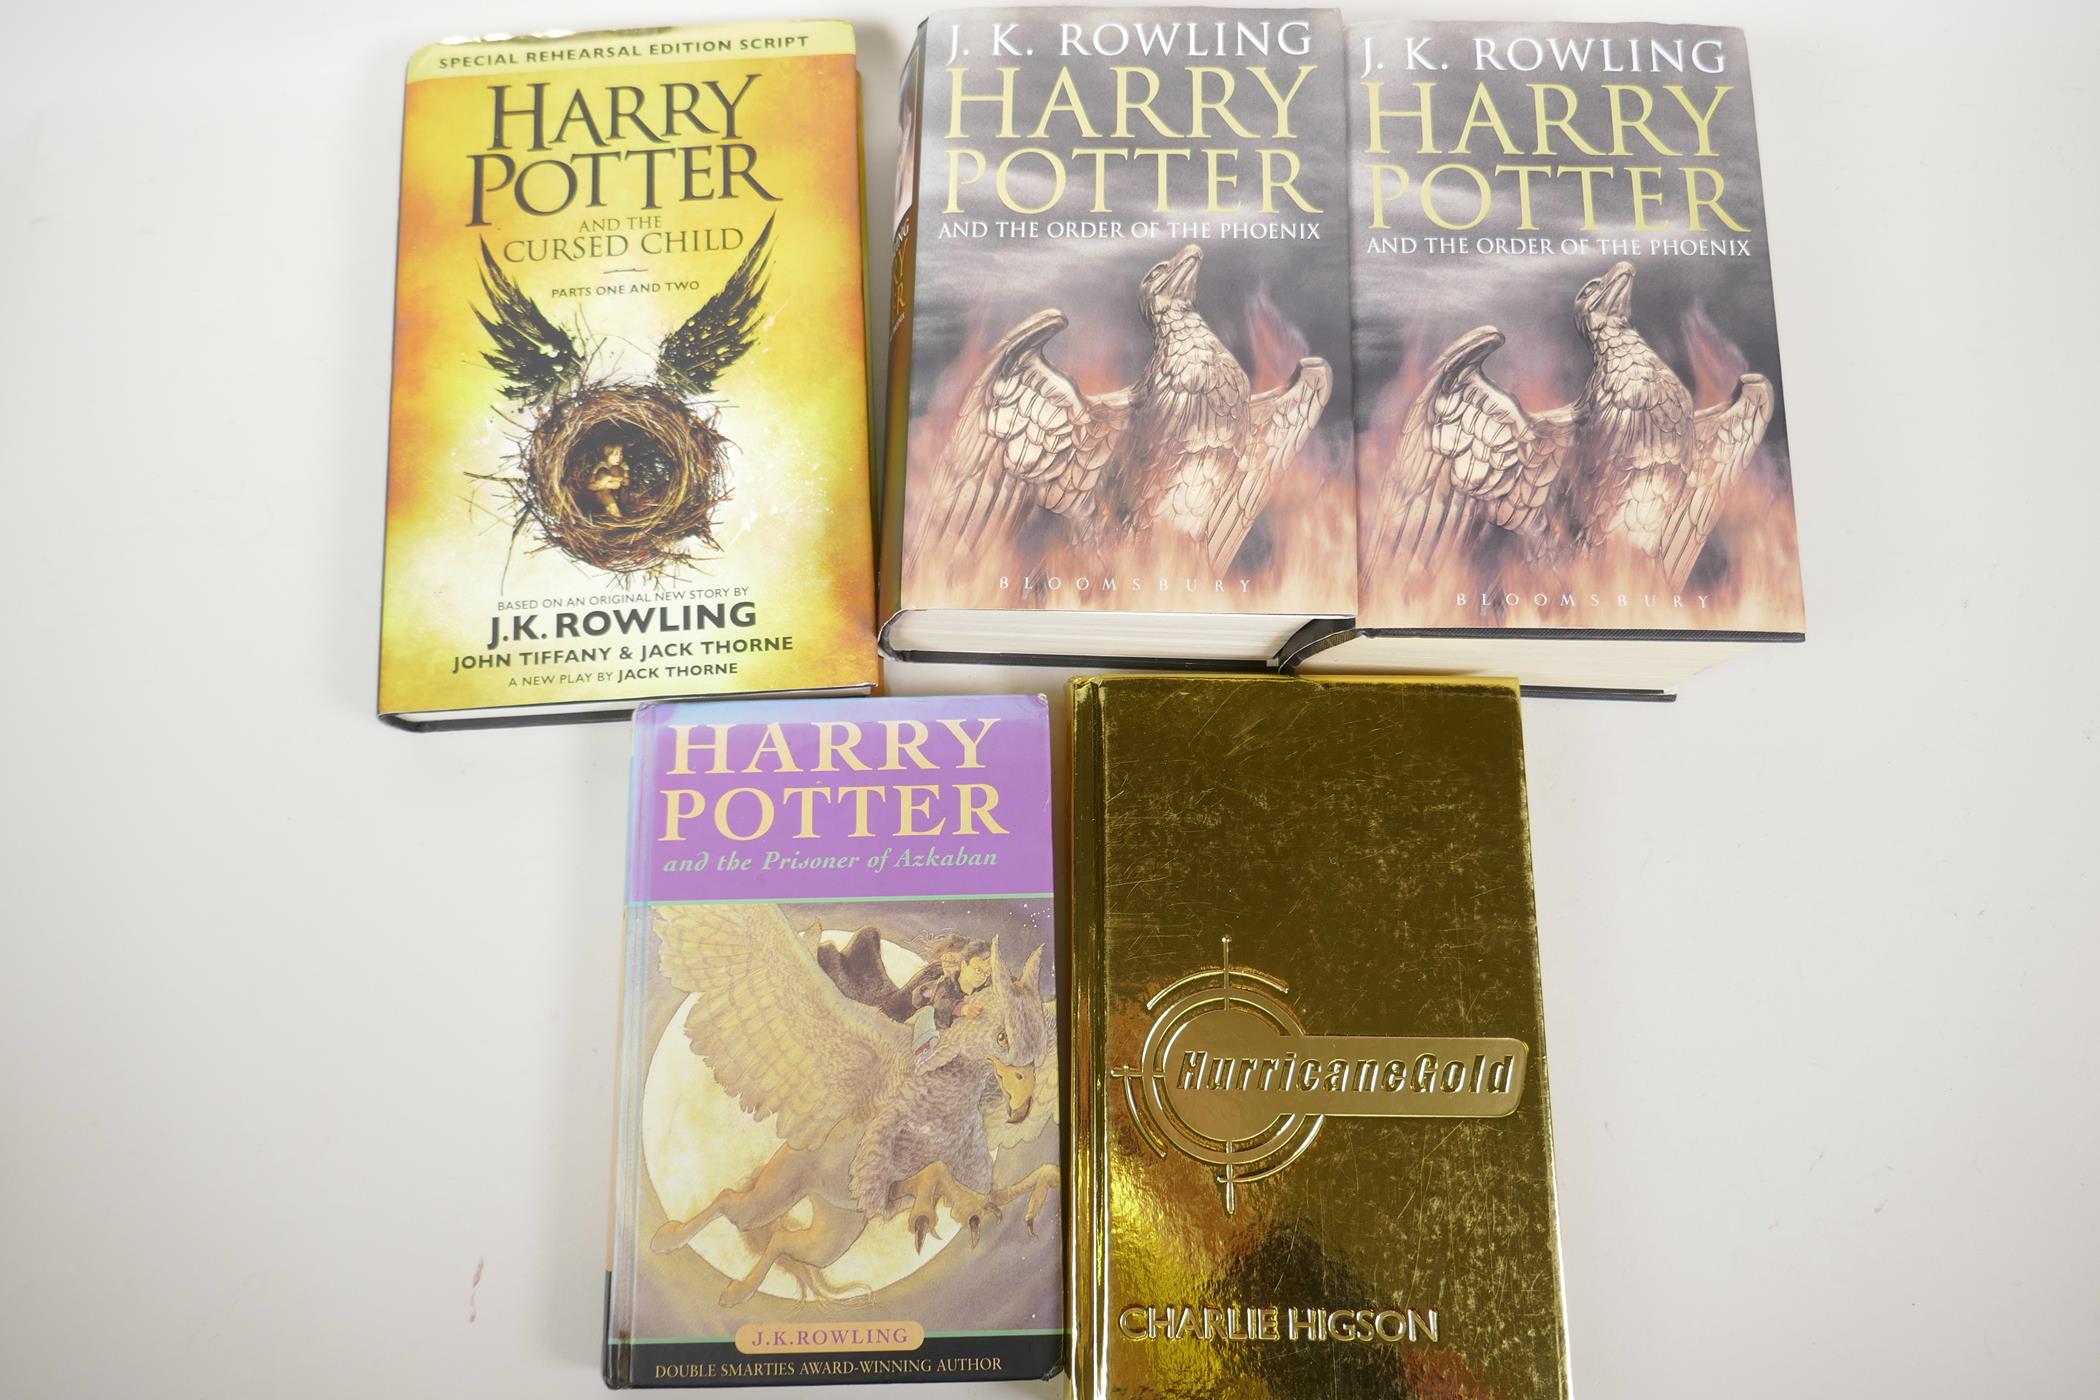 Four Harry Potter books, 'The Cursed Child Play Script', two 'The Order of the Phoenix', 'The